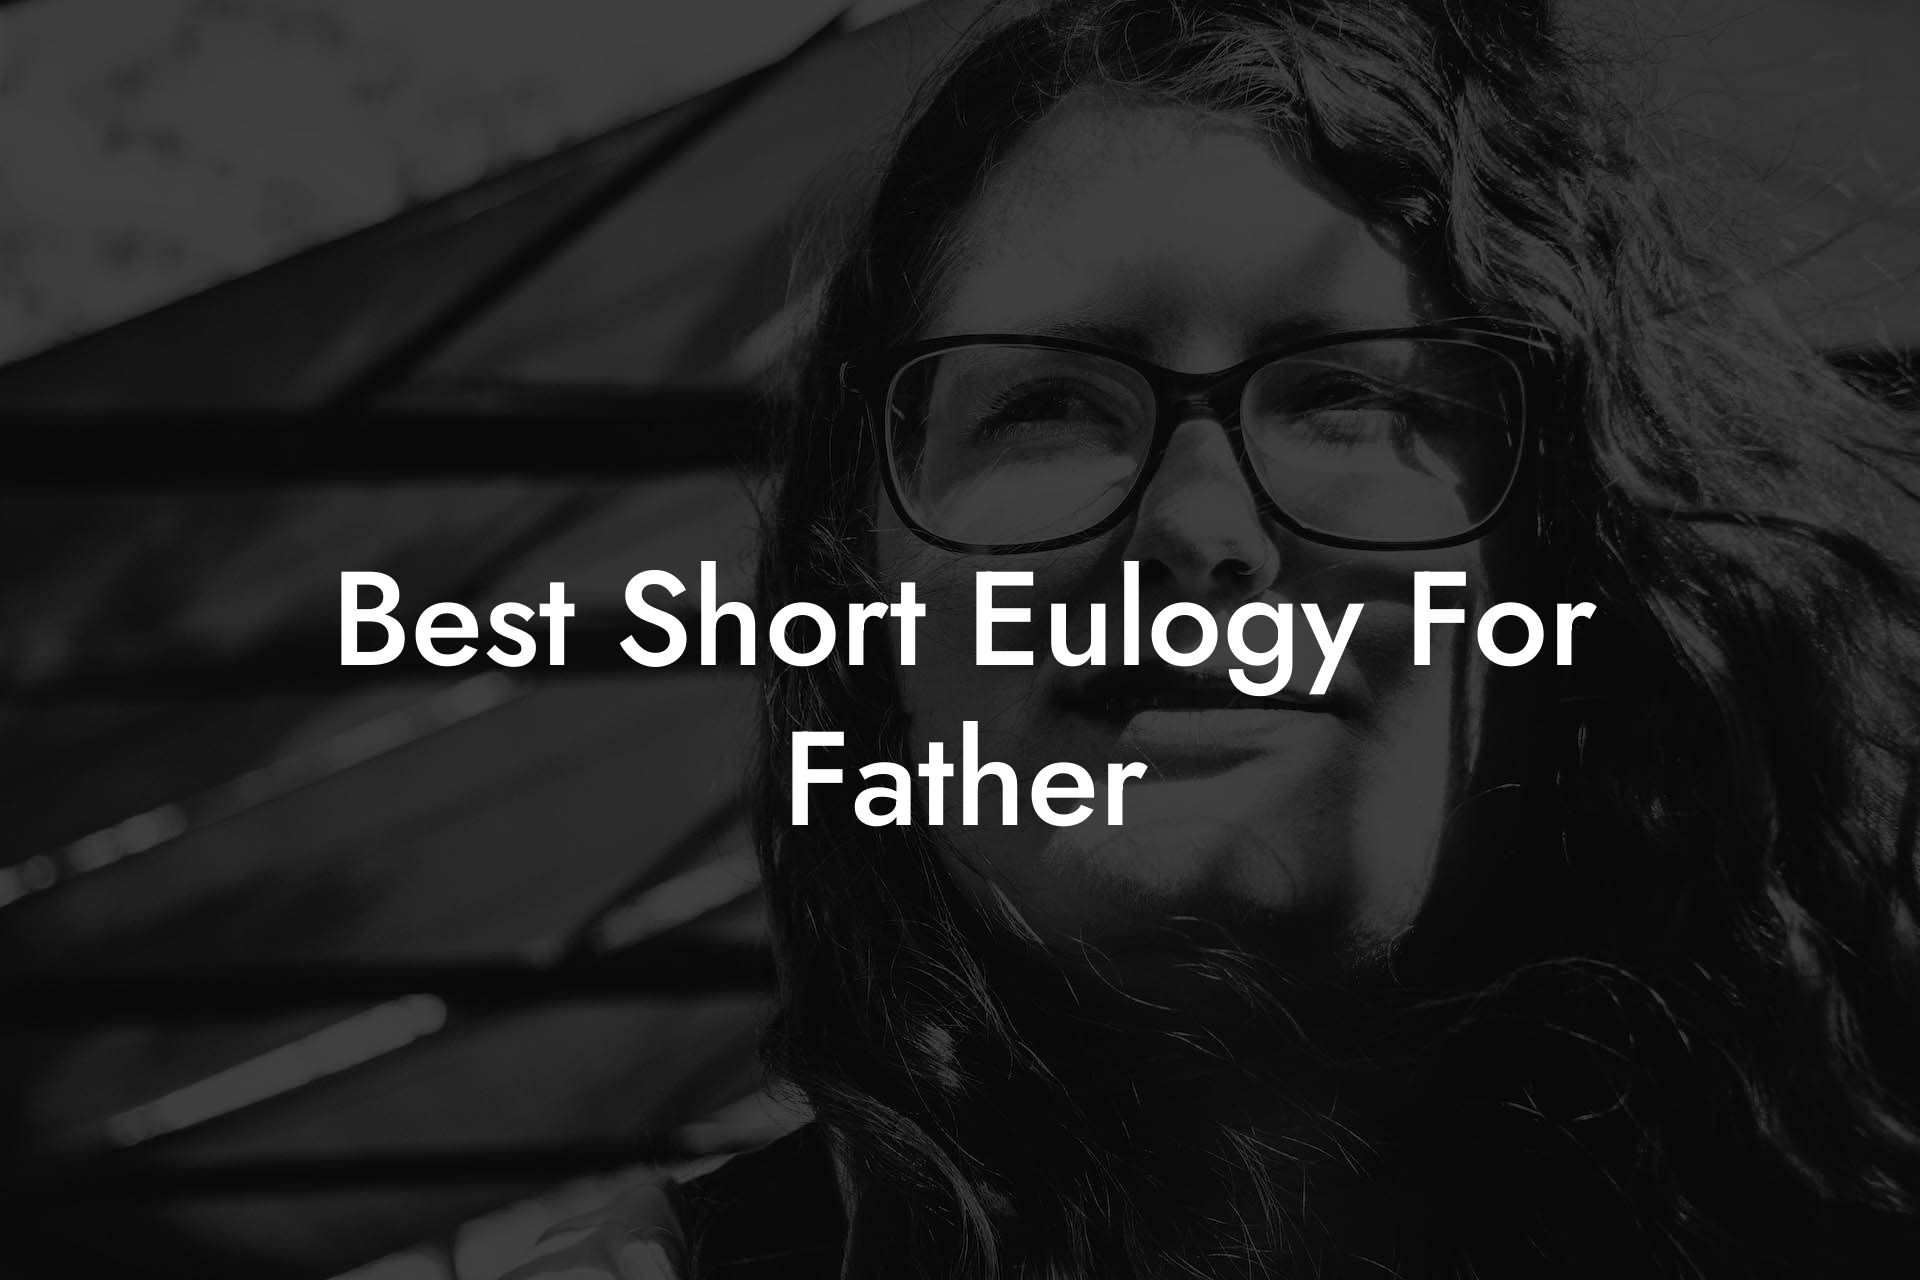 Best Short Eulogy For Father